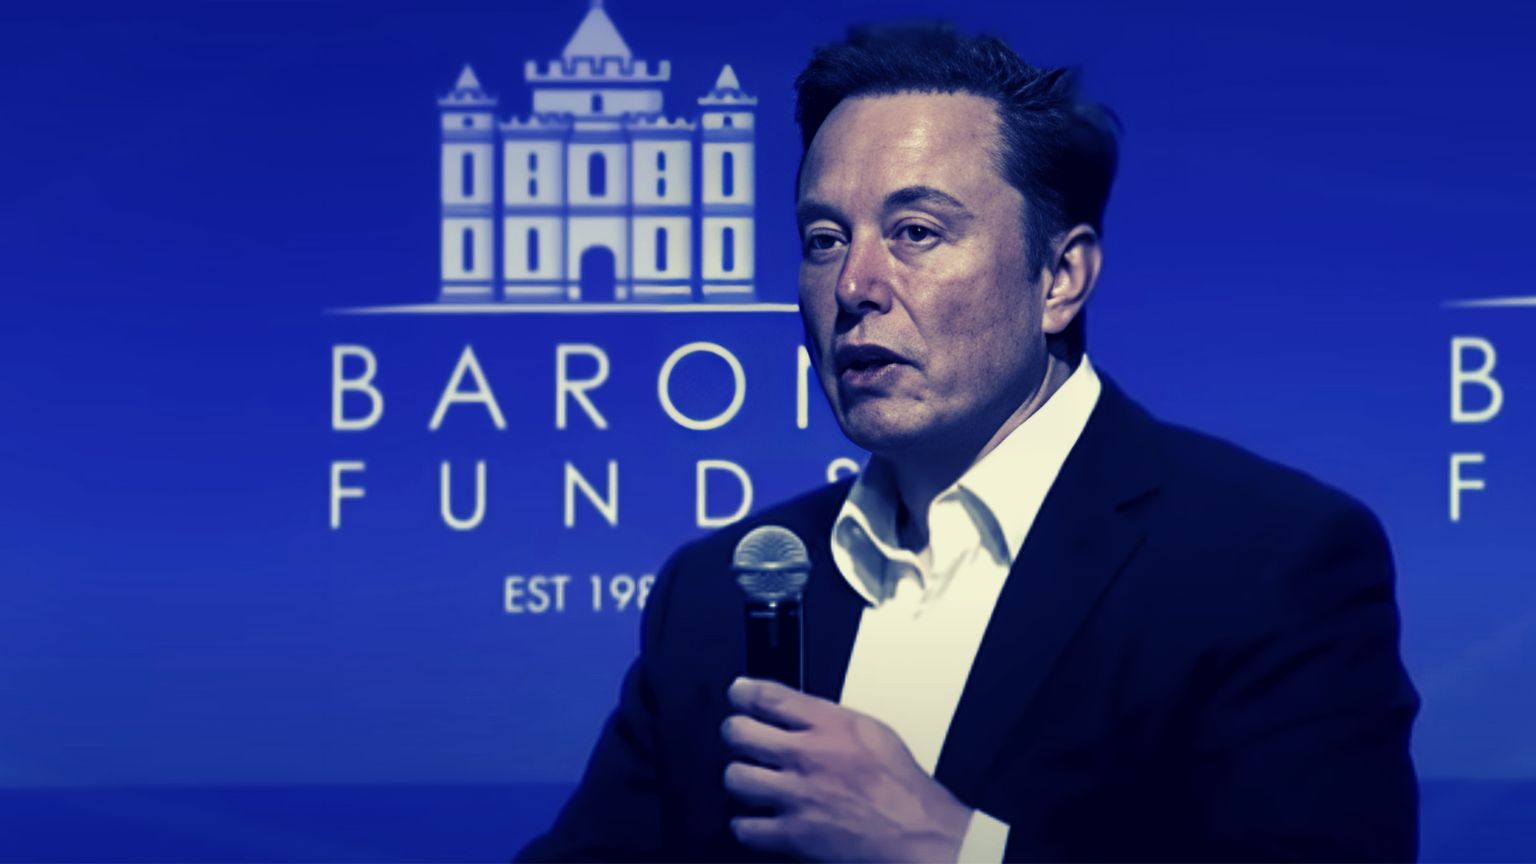 Elon Musk accused federal agency of being “worst offender” in government censorship